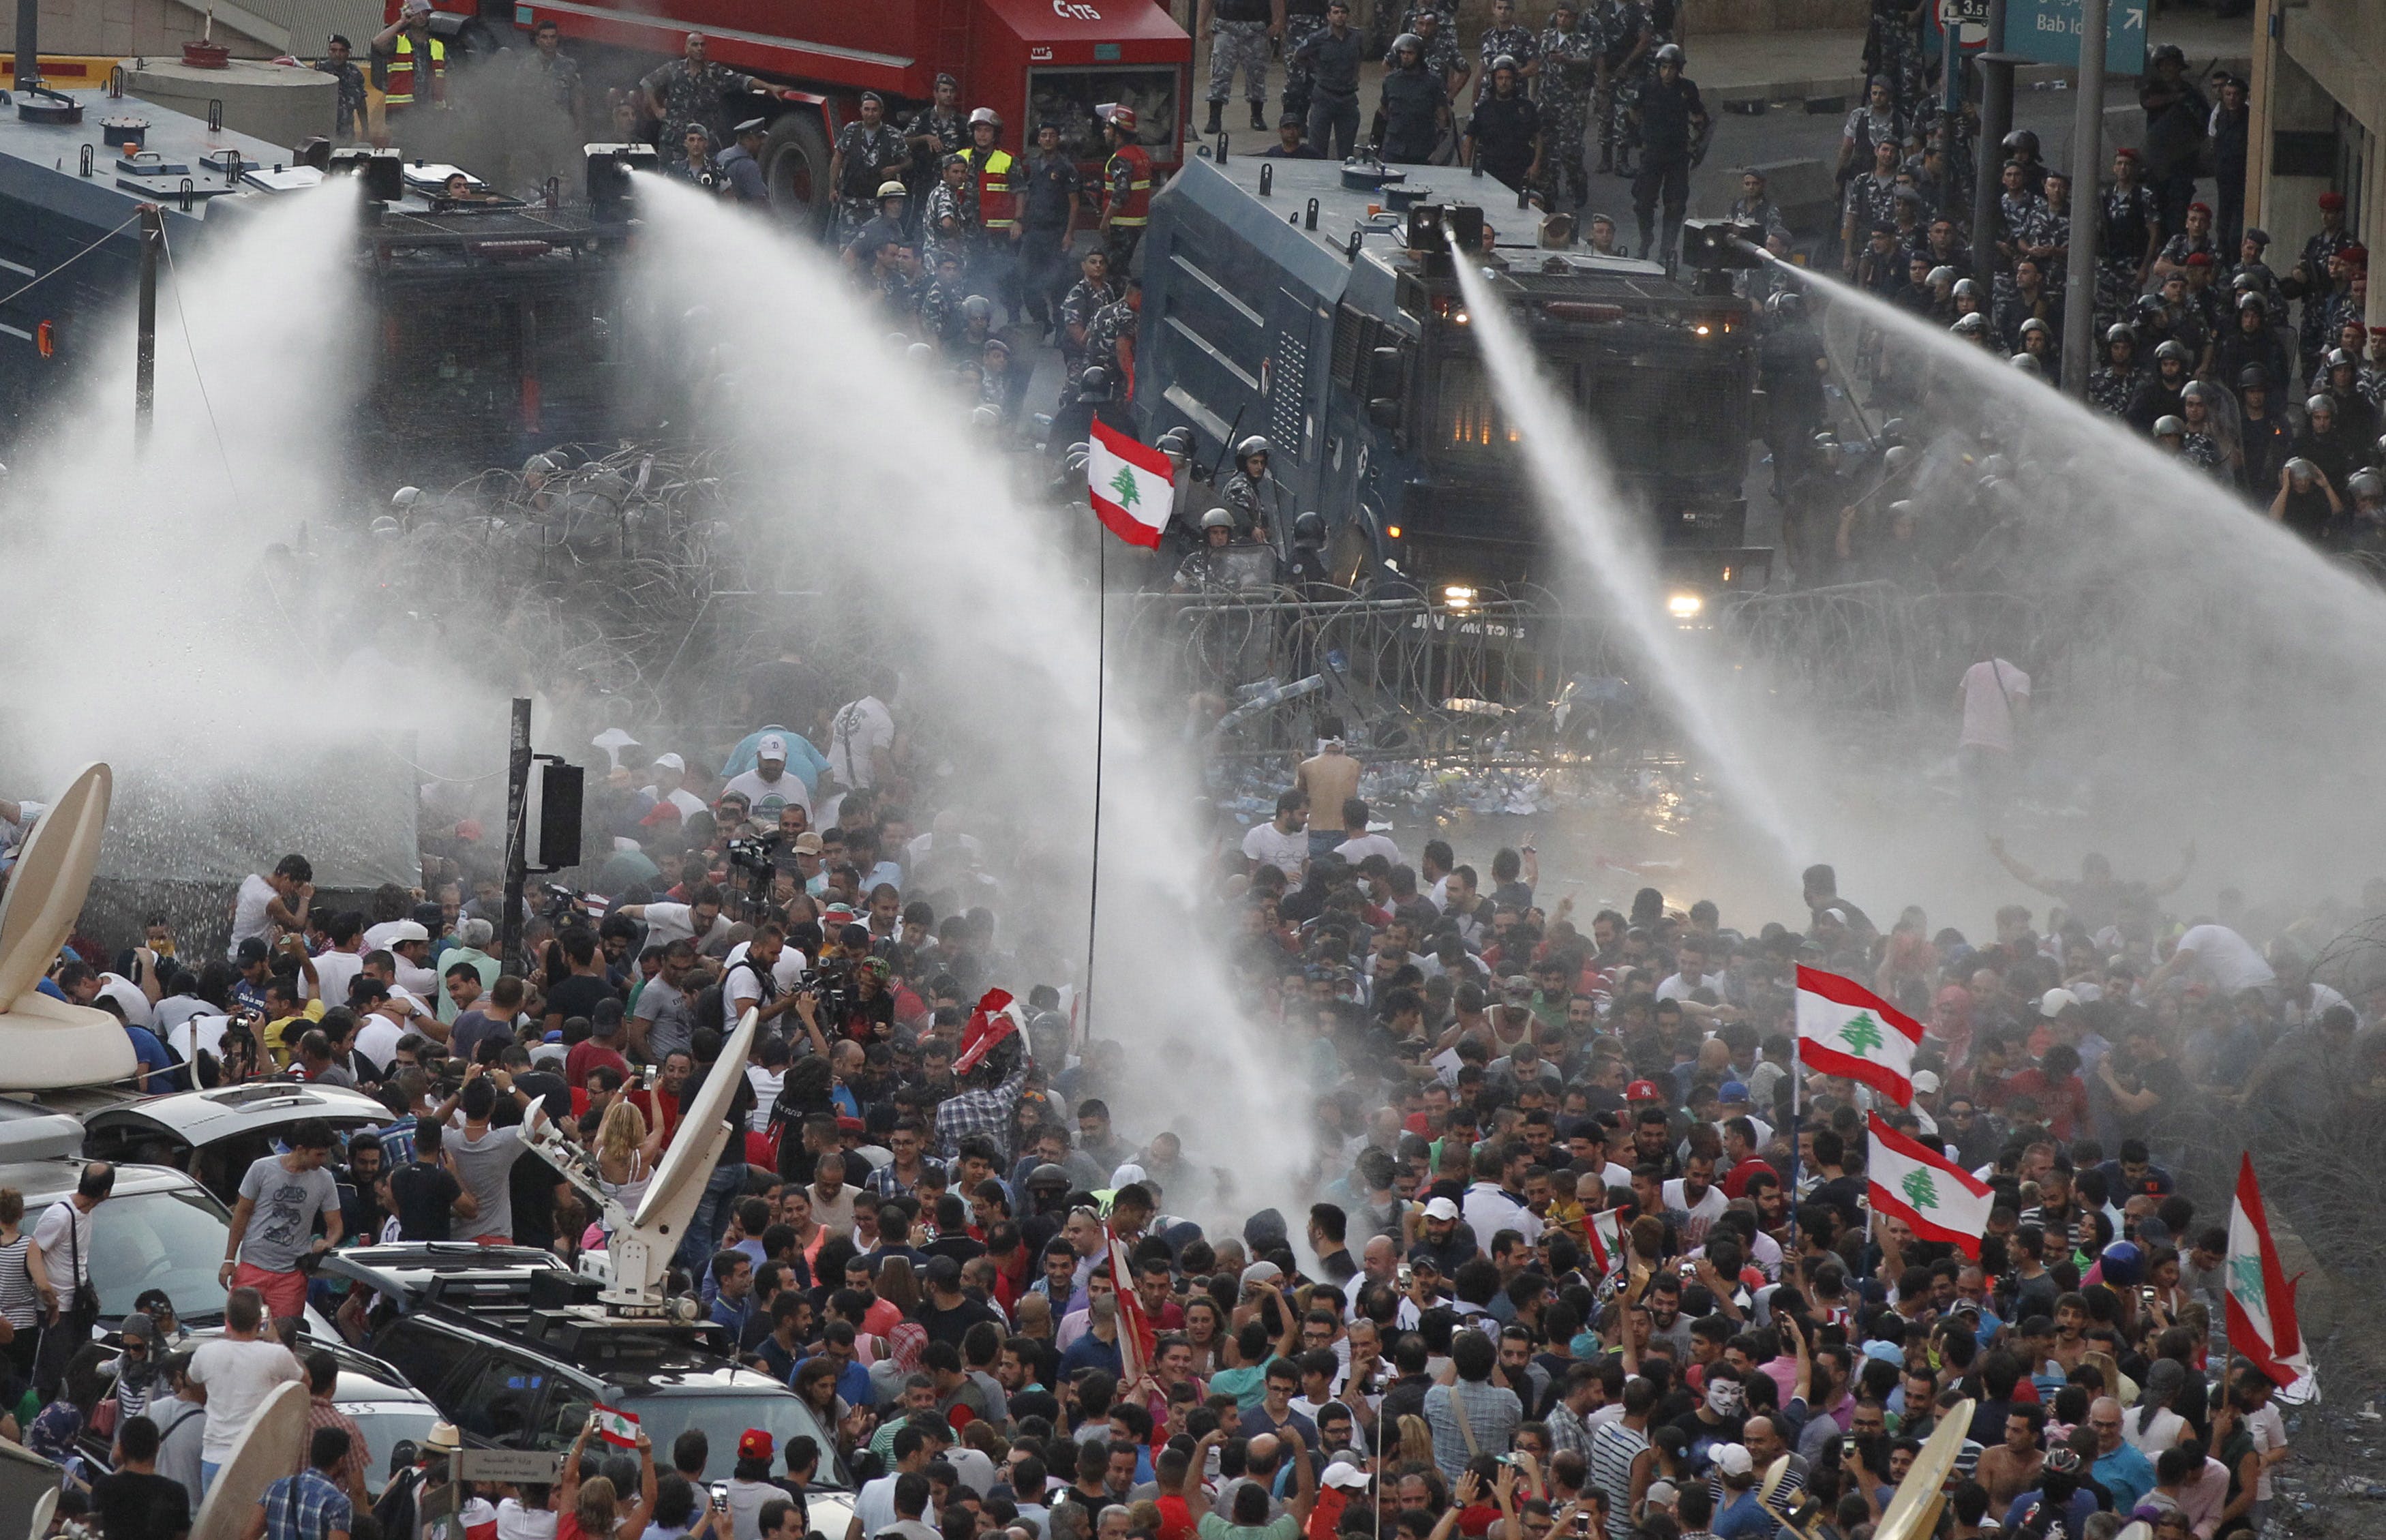 Lebanese protesters are sprayed with water during a protest against corruption and against the government's failure to resolve a crisis over rubbish disposal, near the government palace in Beirut, Leb